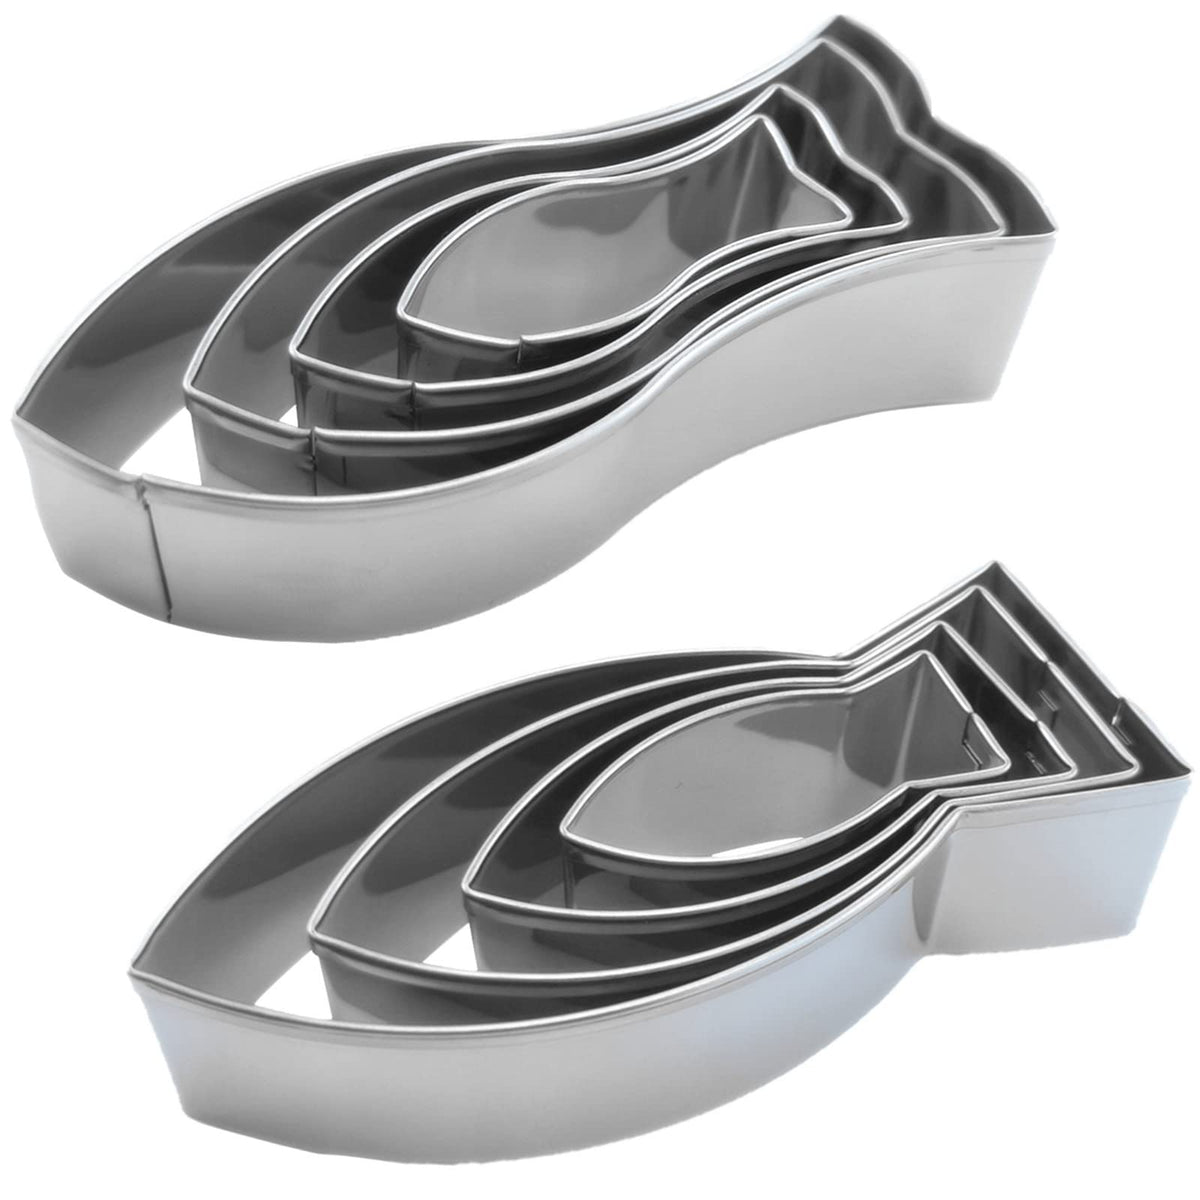  Bakerpan Stainless Steel Fish Cookie Cutter Shapes - Set of 2:  Home & Kitchen